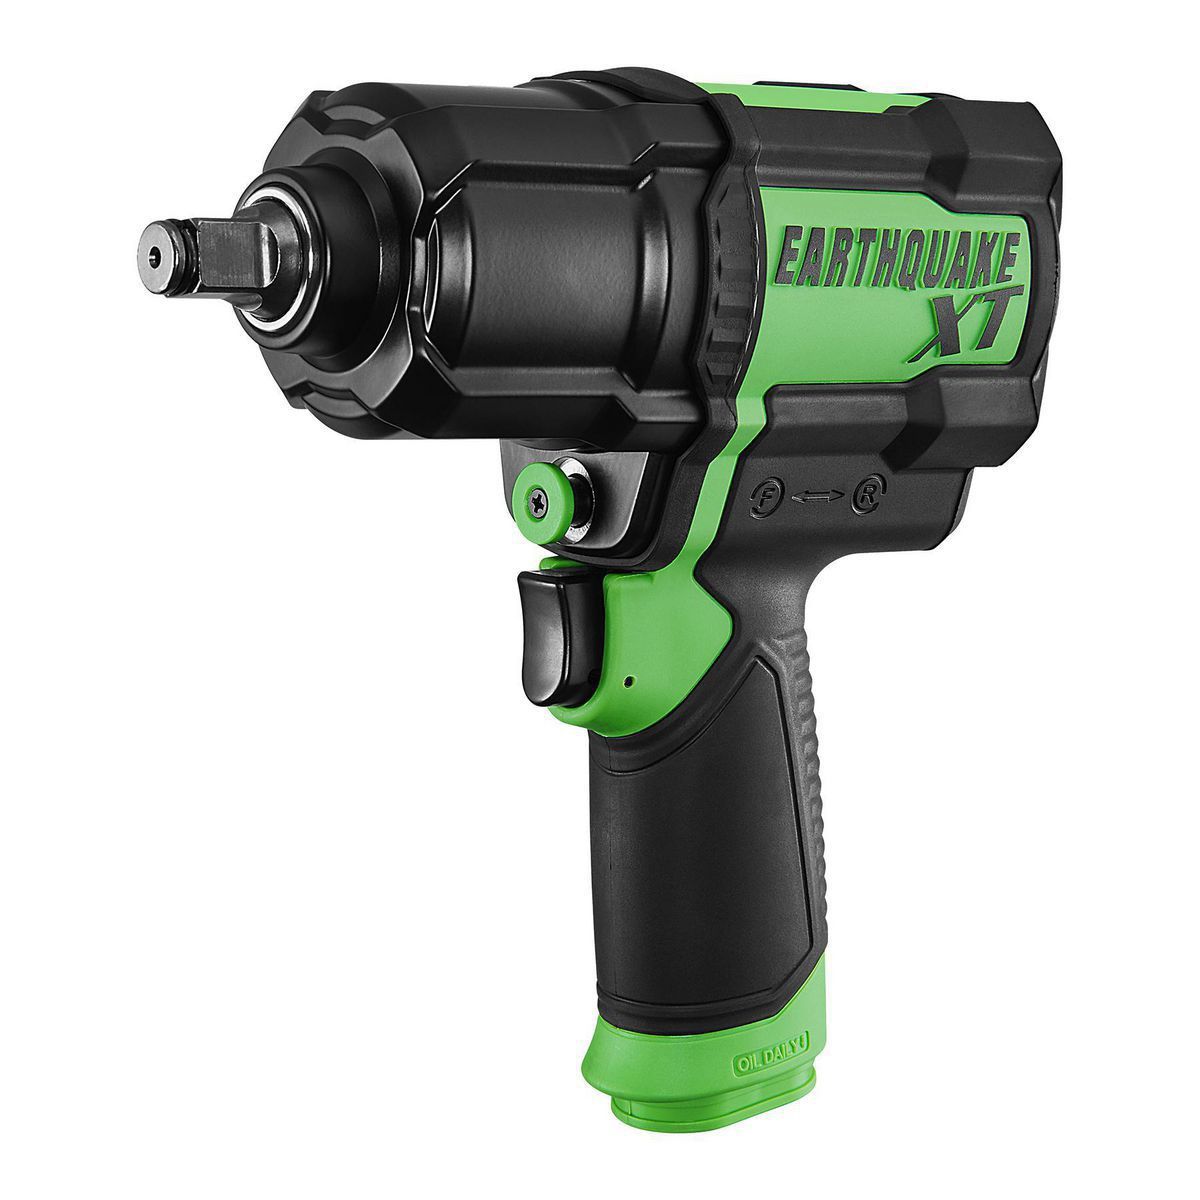 Brand New in box never opened EARTHQUAKE XT 1/2 in. Composite Air Impact Wrench, Twin Hammer, 1190 ft. lbs., Green